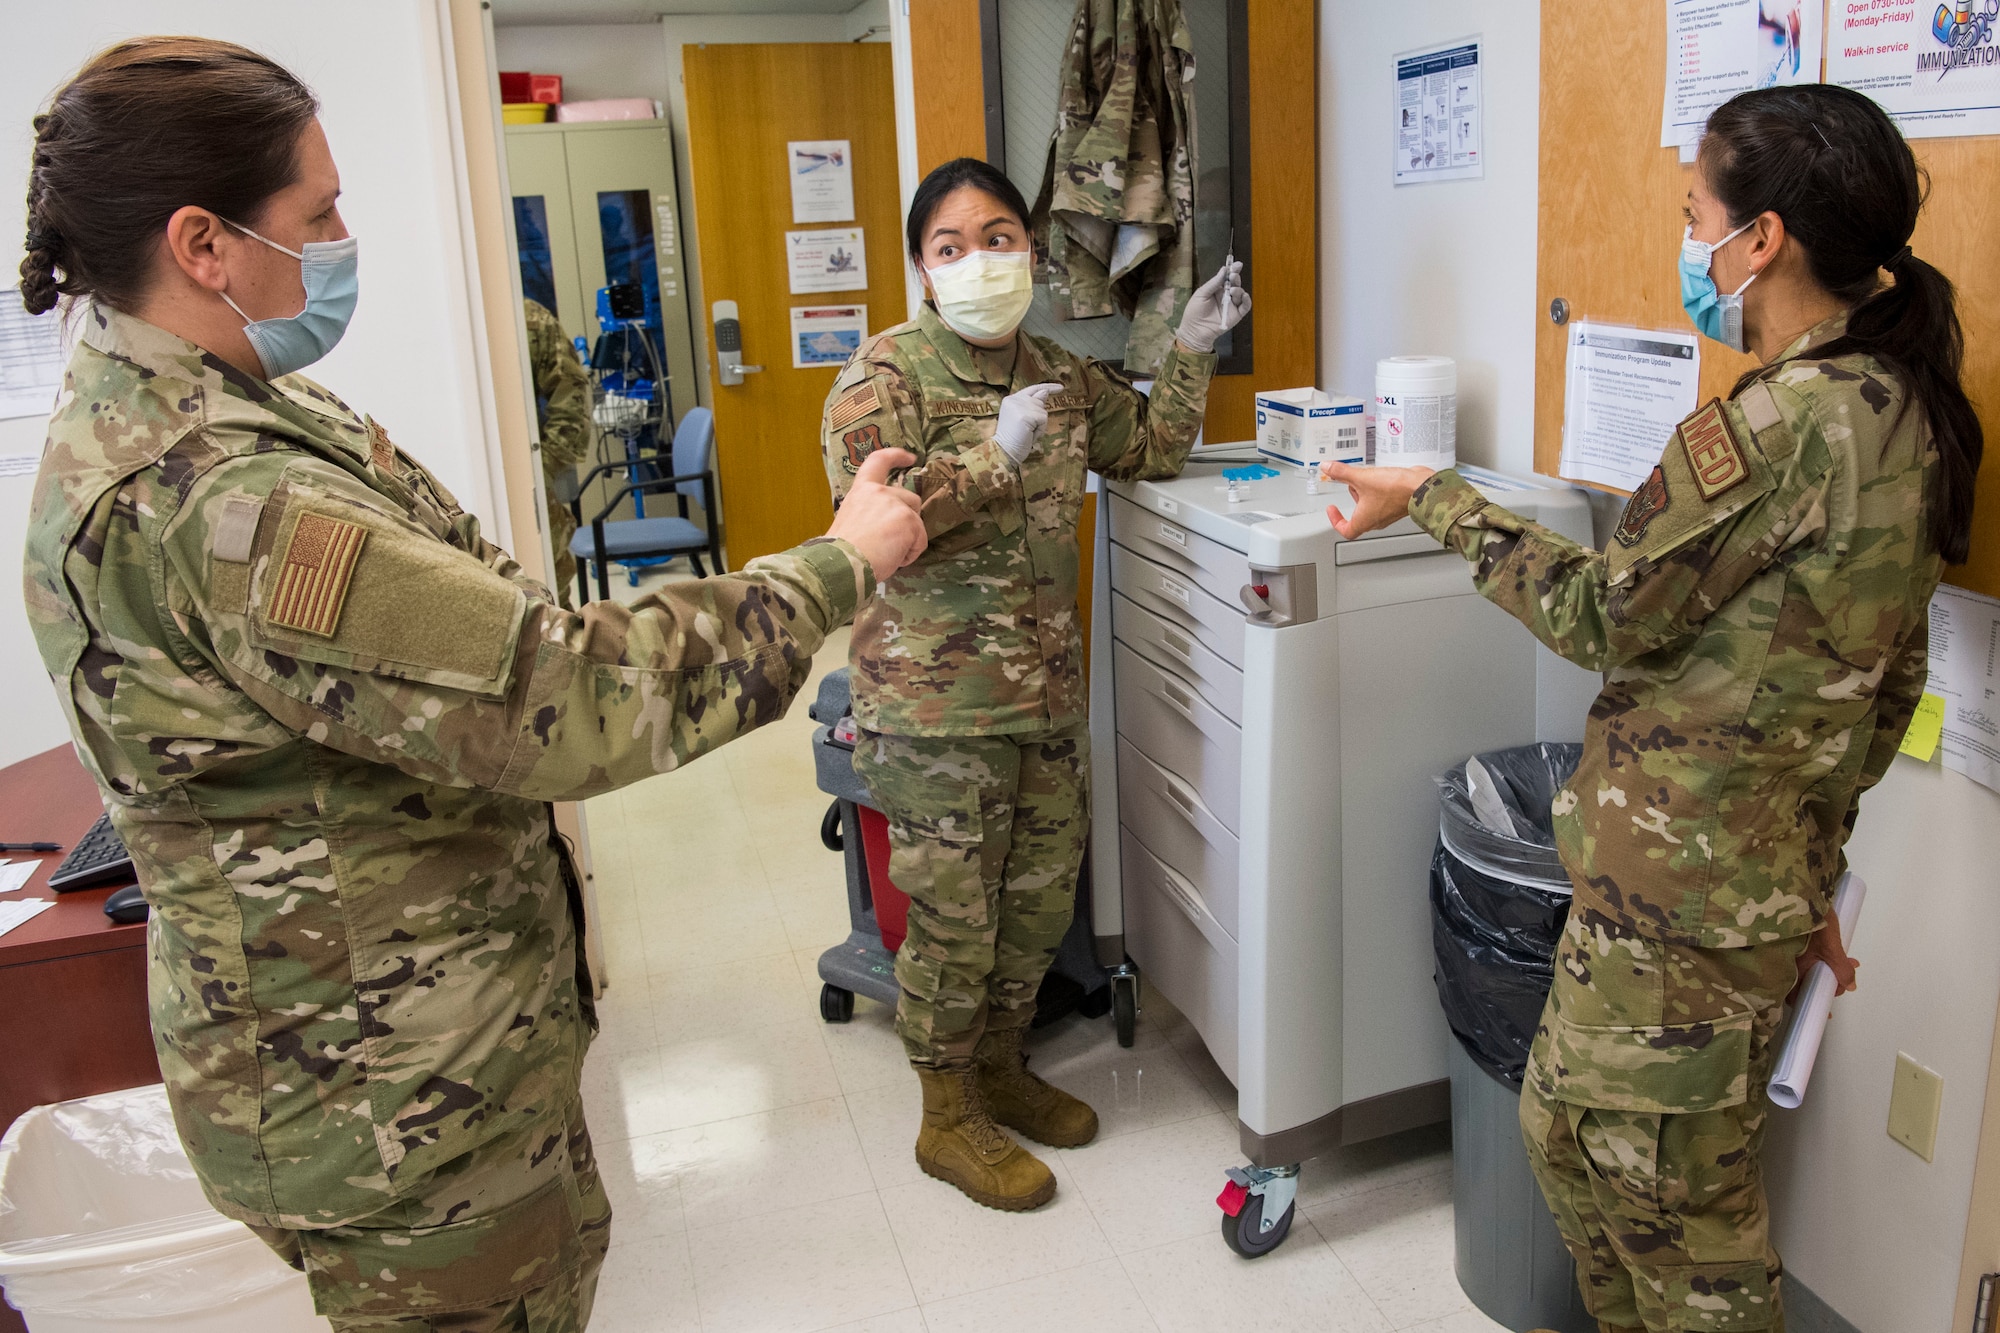 U.S Air Force 1st Lt. Rylyn Kinoshita with the 624th Aeromedical Staging Squadron instructs Capt. Kathleen Page and 1st Lt. Elizabeth Kaczmar in mixing the COVID-19 vaccine at Joint Base Pearl Harbor-Hickam, Hawaii, March 7, 2021, during the Unit Training Assembly.